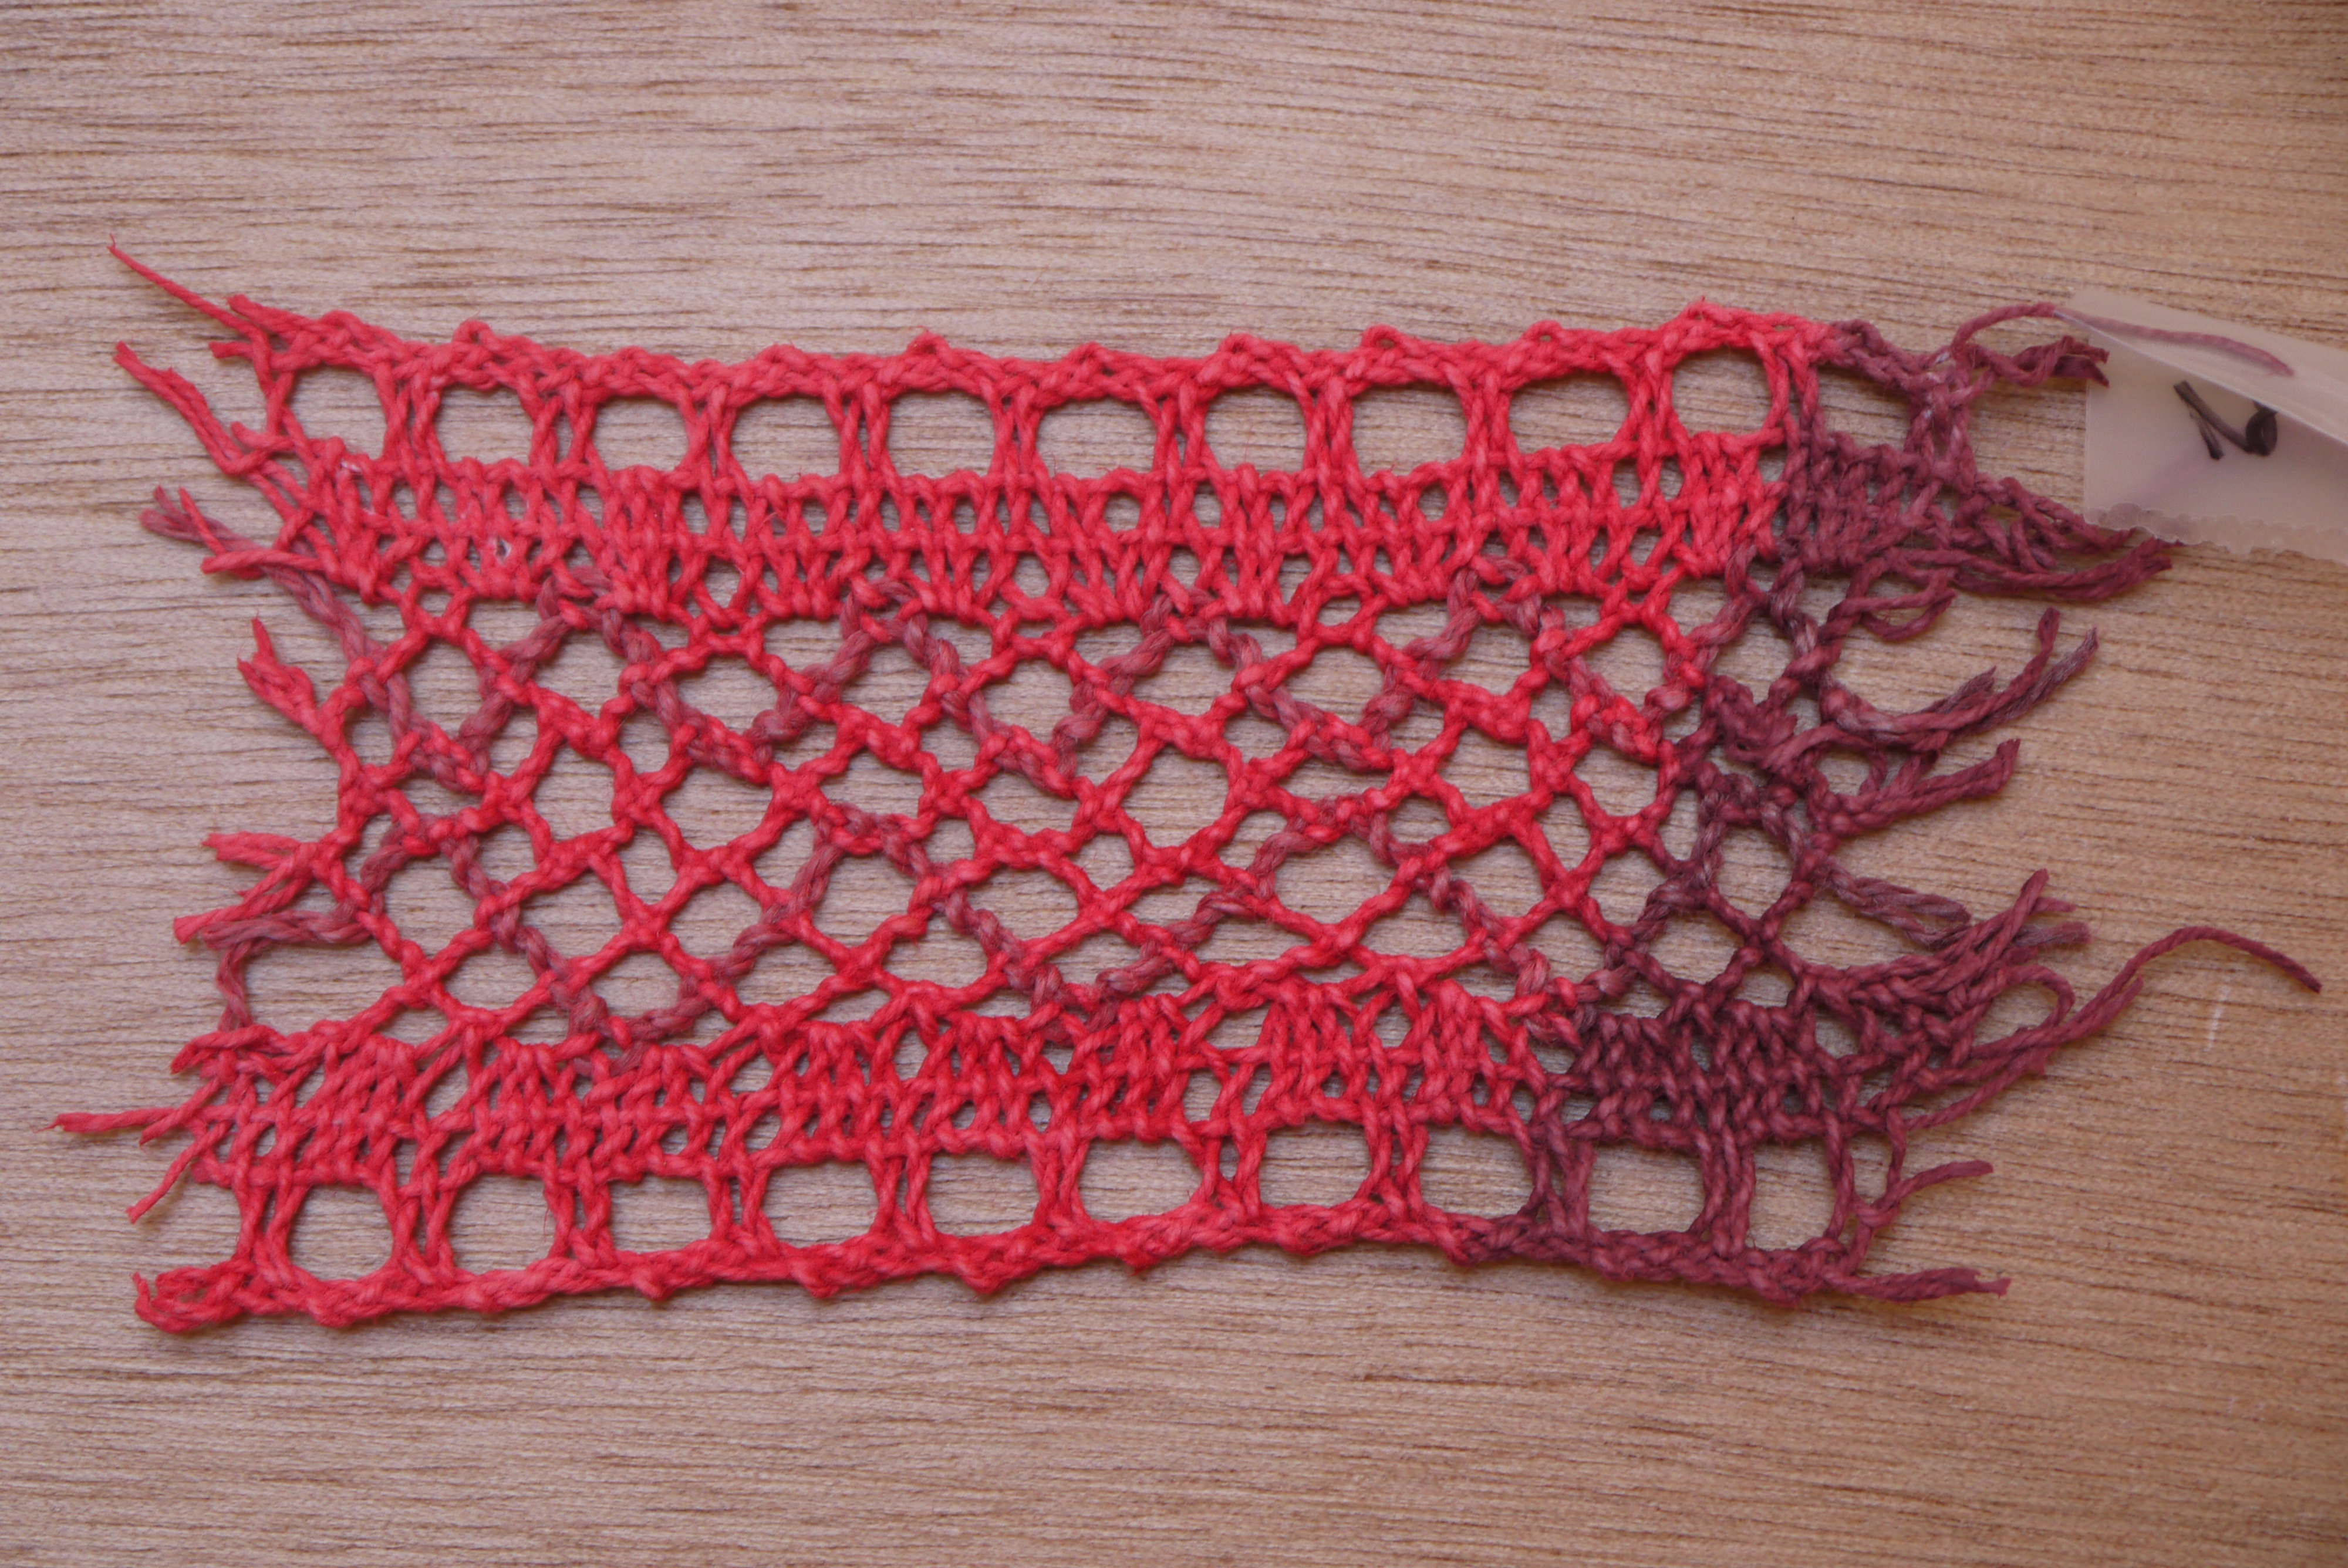 Developing Butterfly Lace